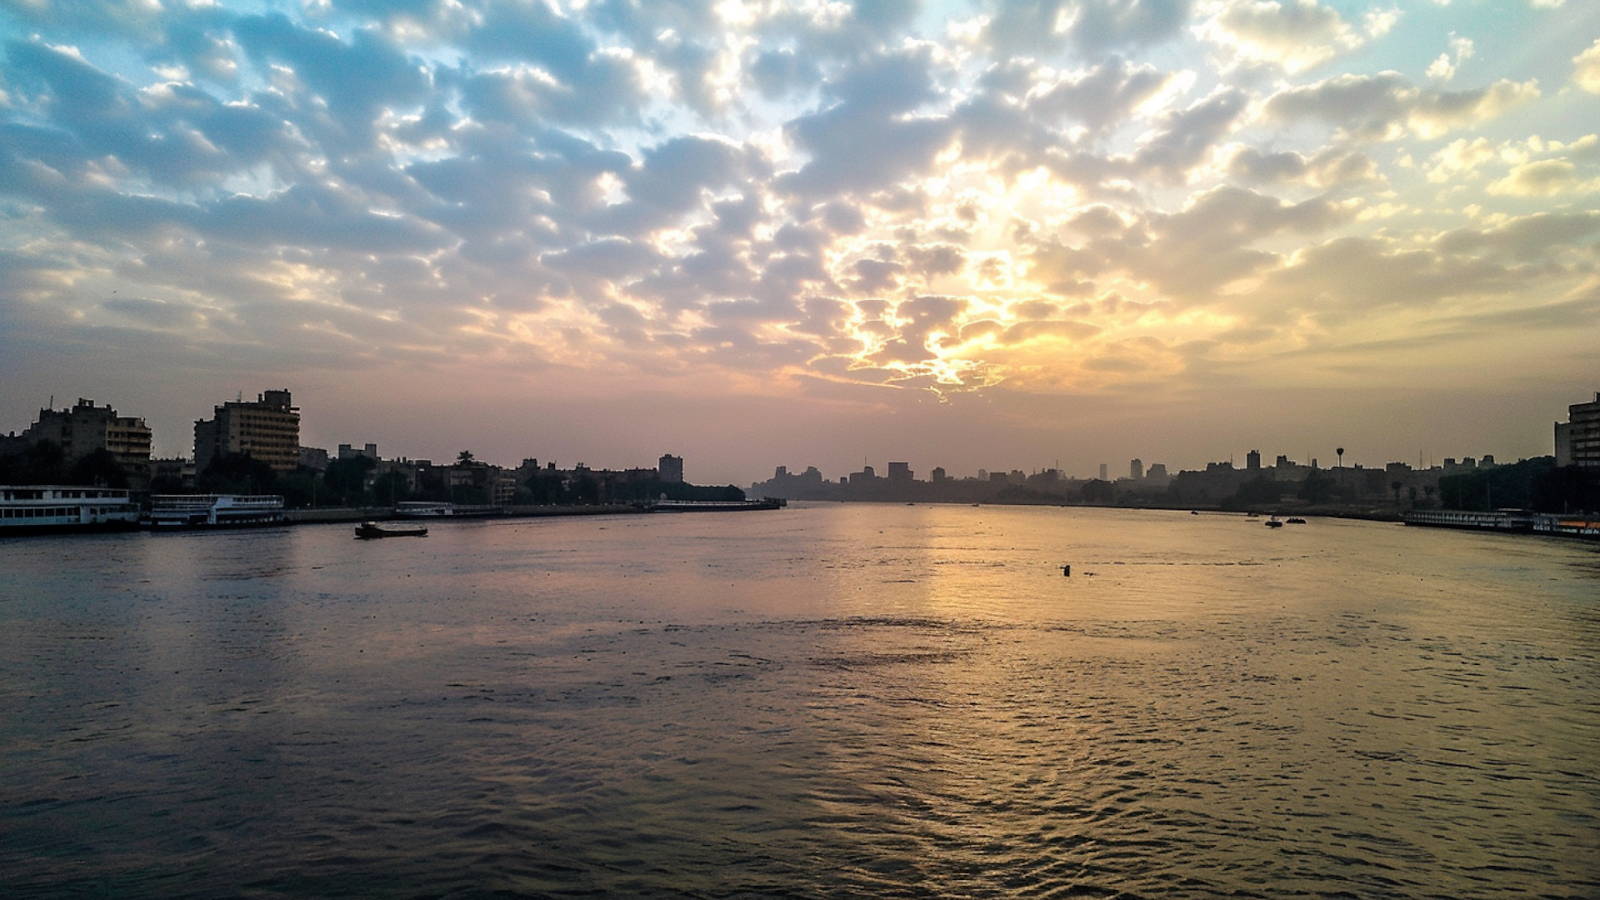 A panoramic view of the Nile River as seen from Cairo, Egypt